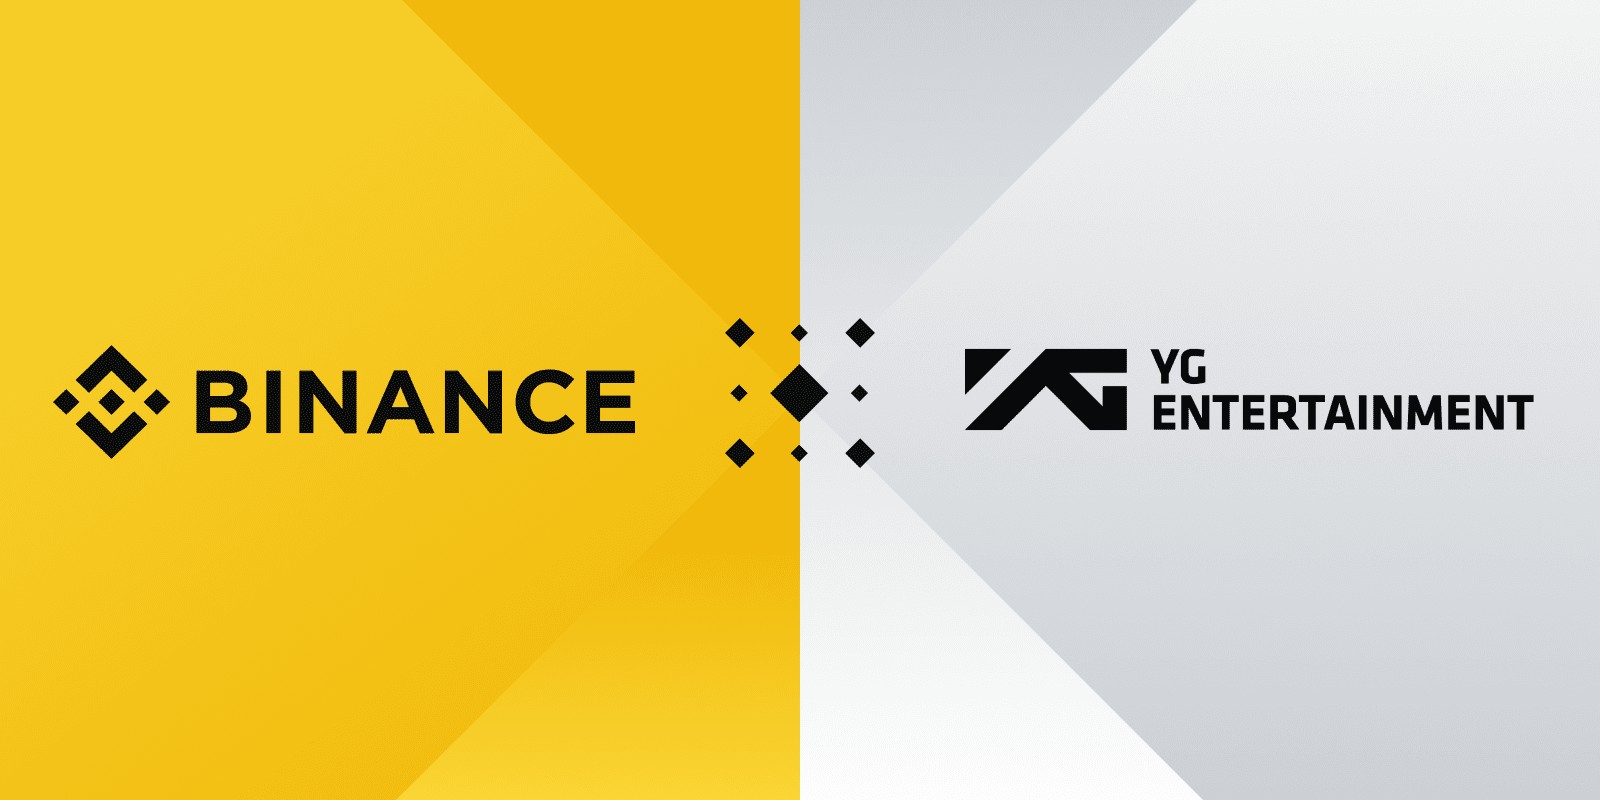 YG Entertainment partners with Binance to launch NFT projects: "We plan to steadily build an innovative and eco-friendly NFT ecosystem."